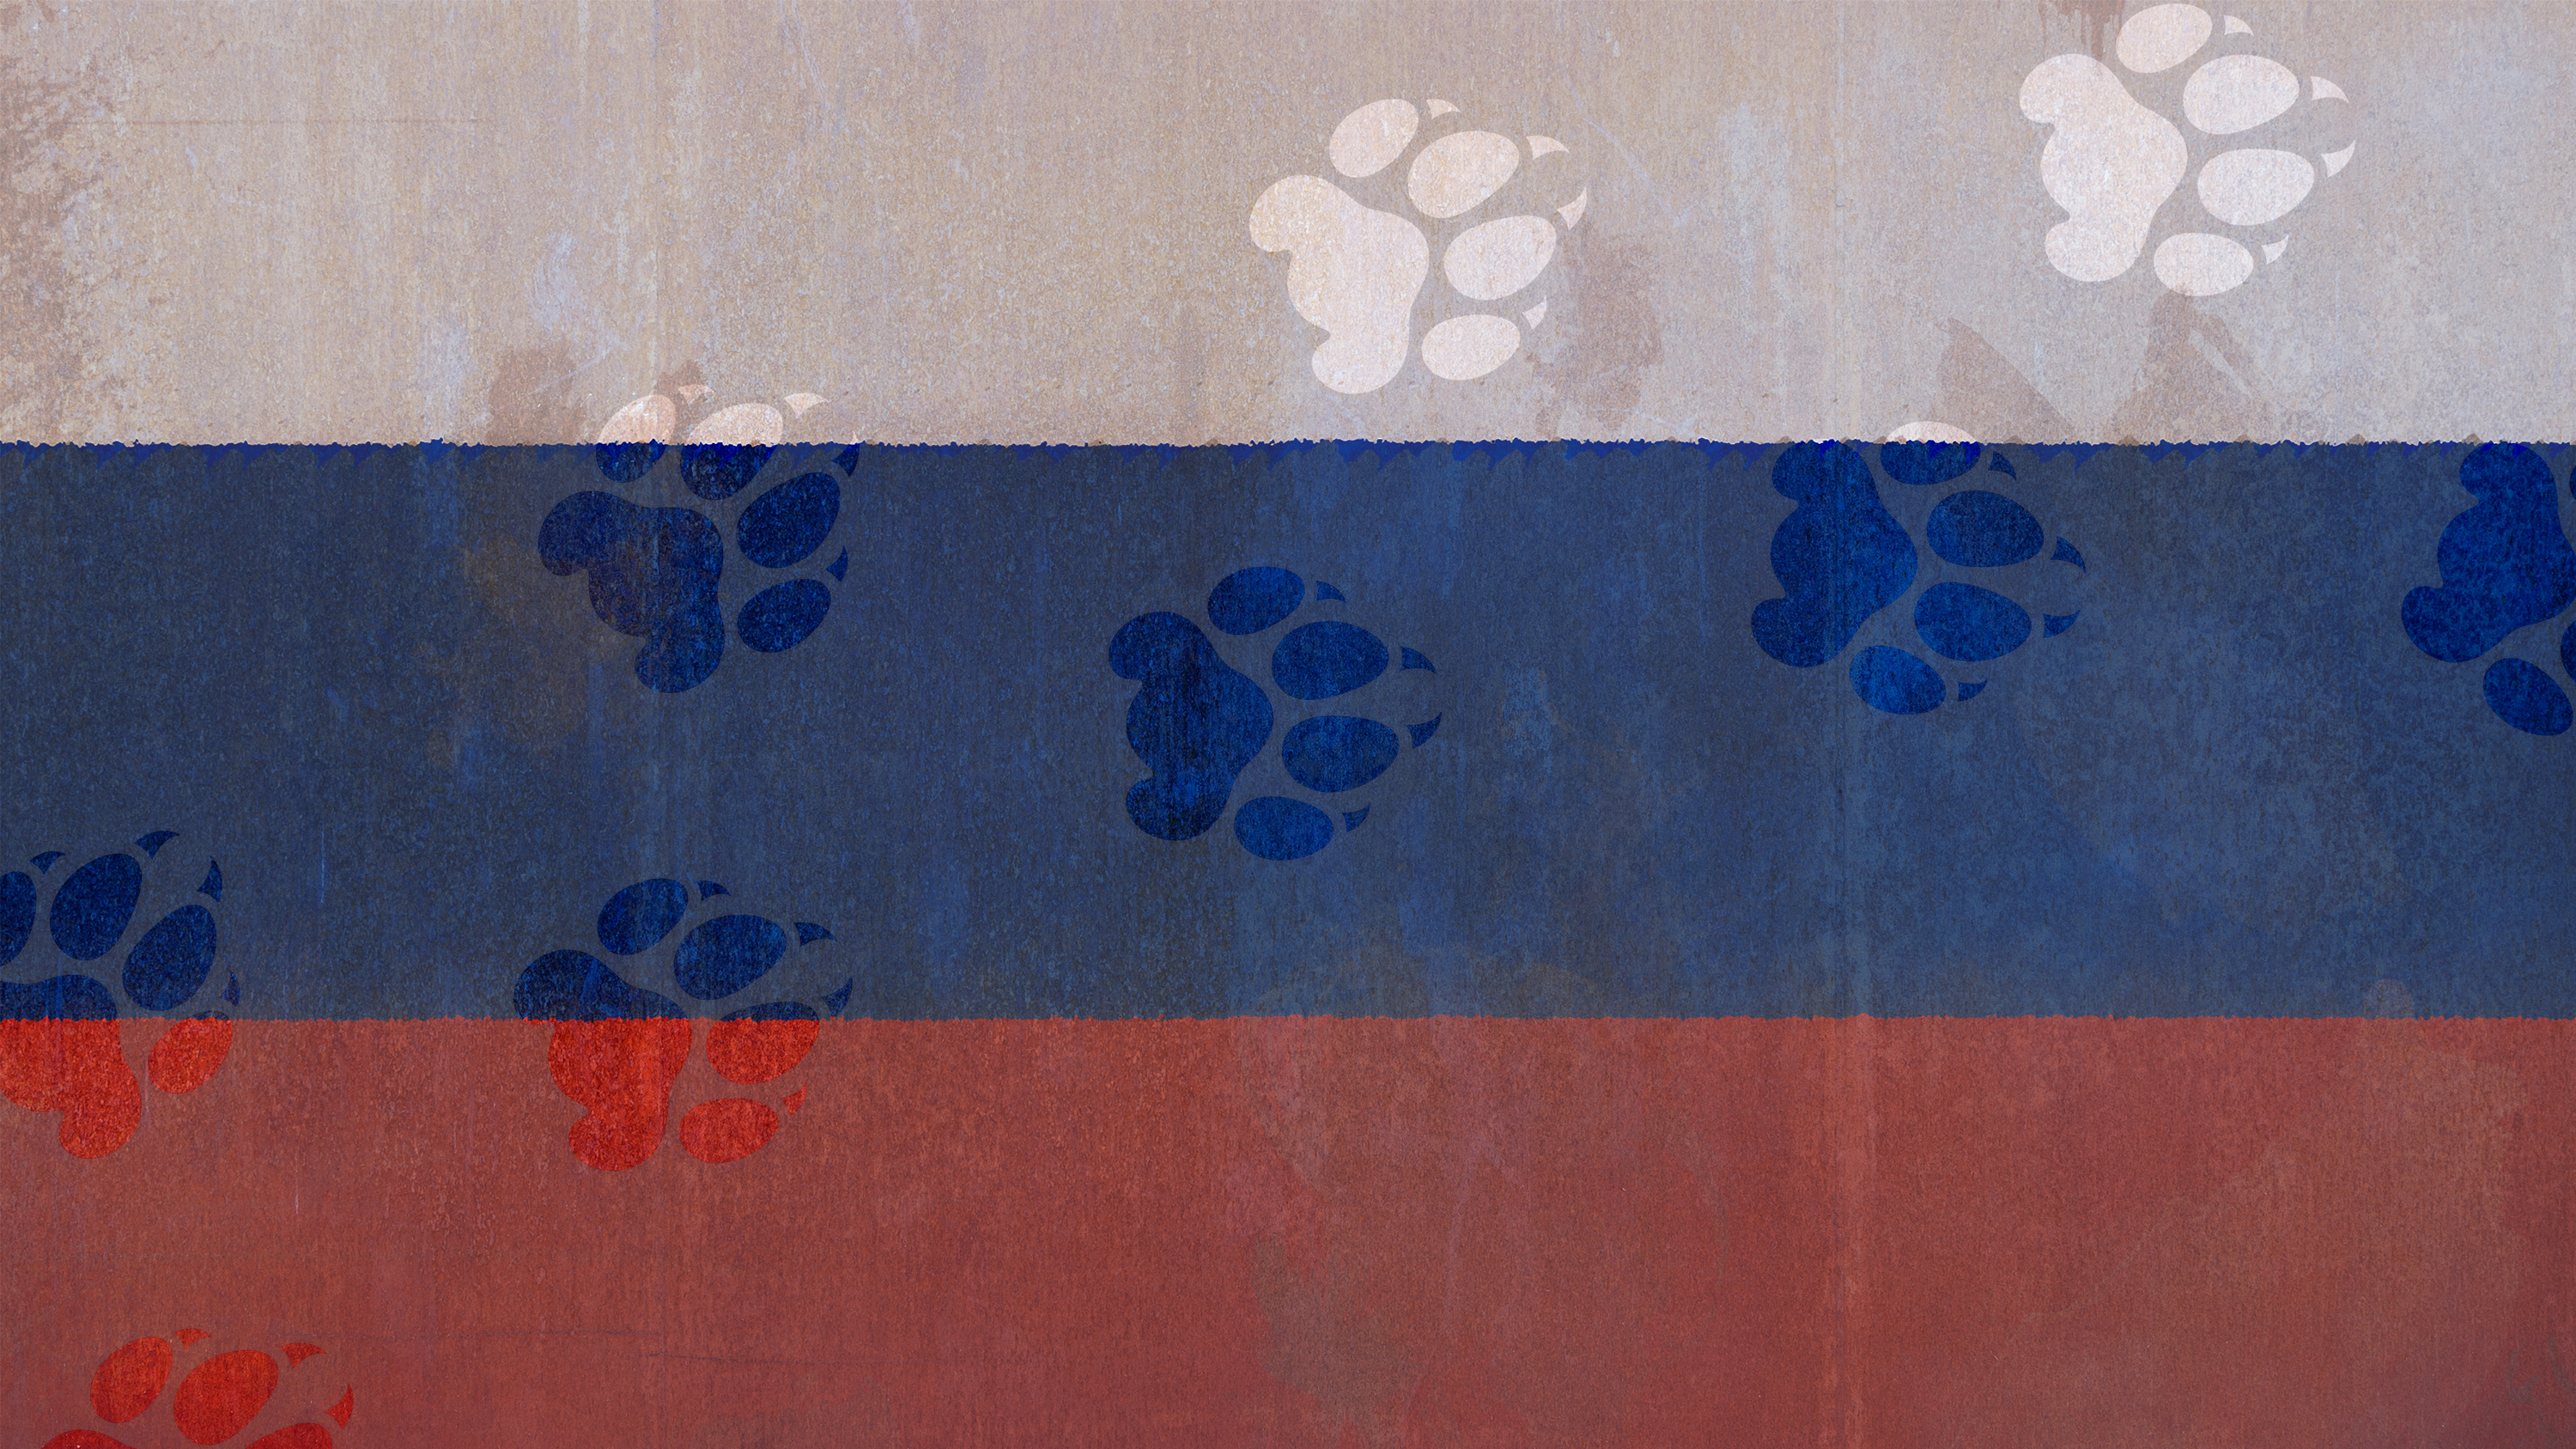 A Russian flag with a cat's paw prints imprinted across it.